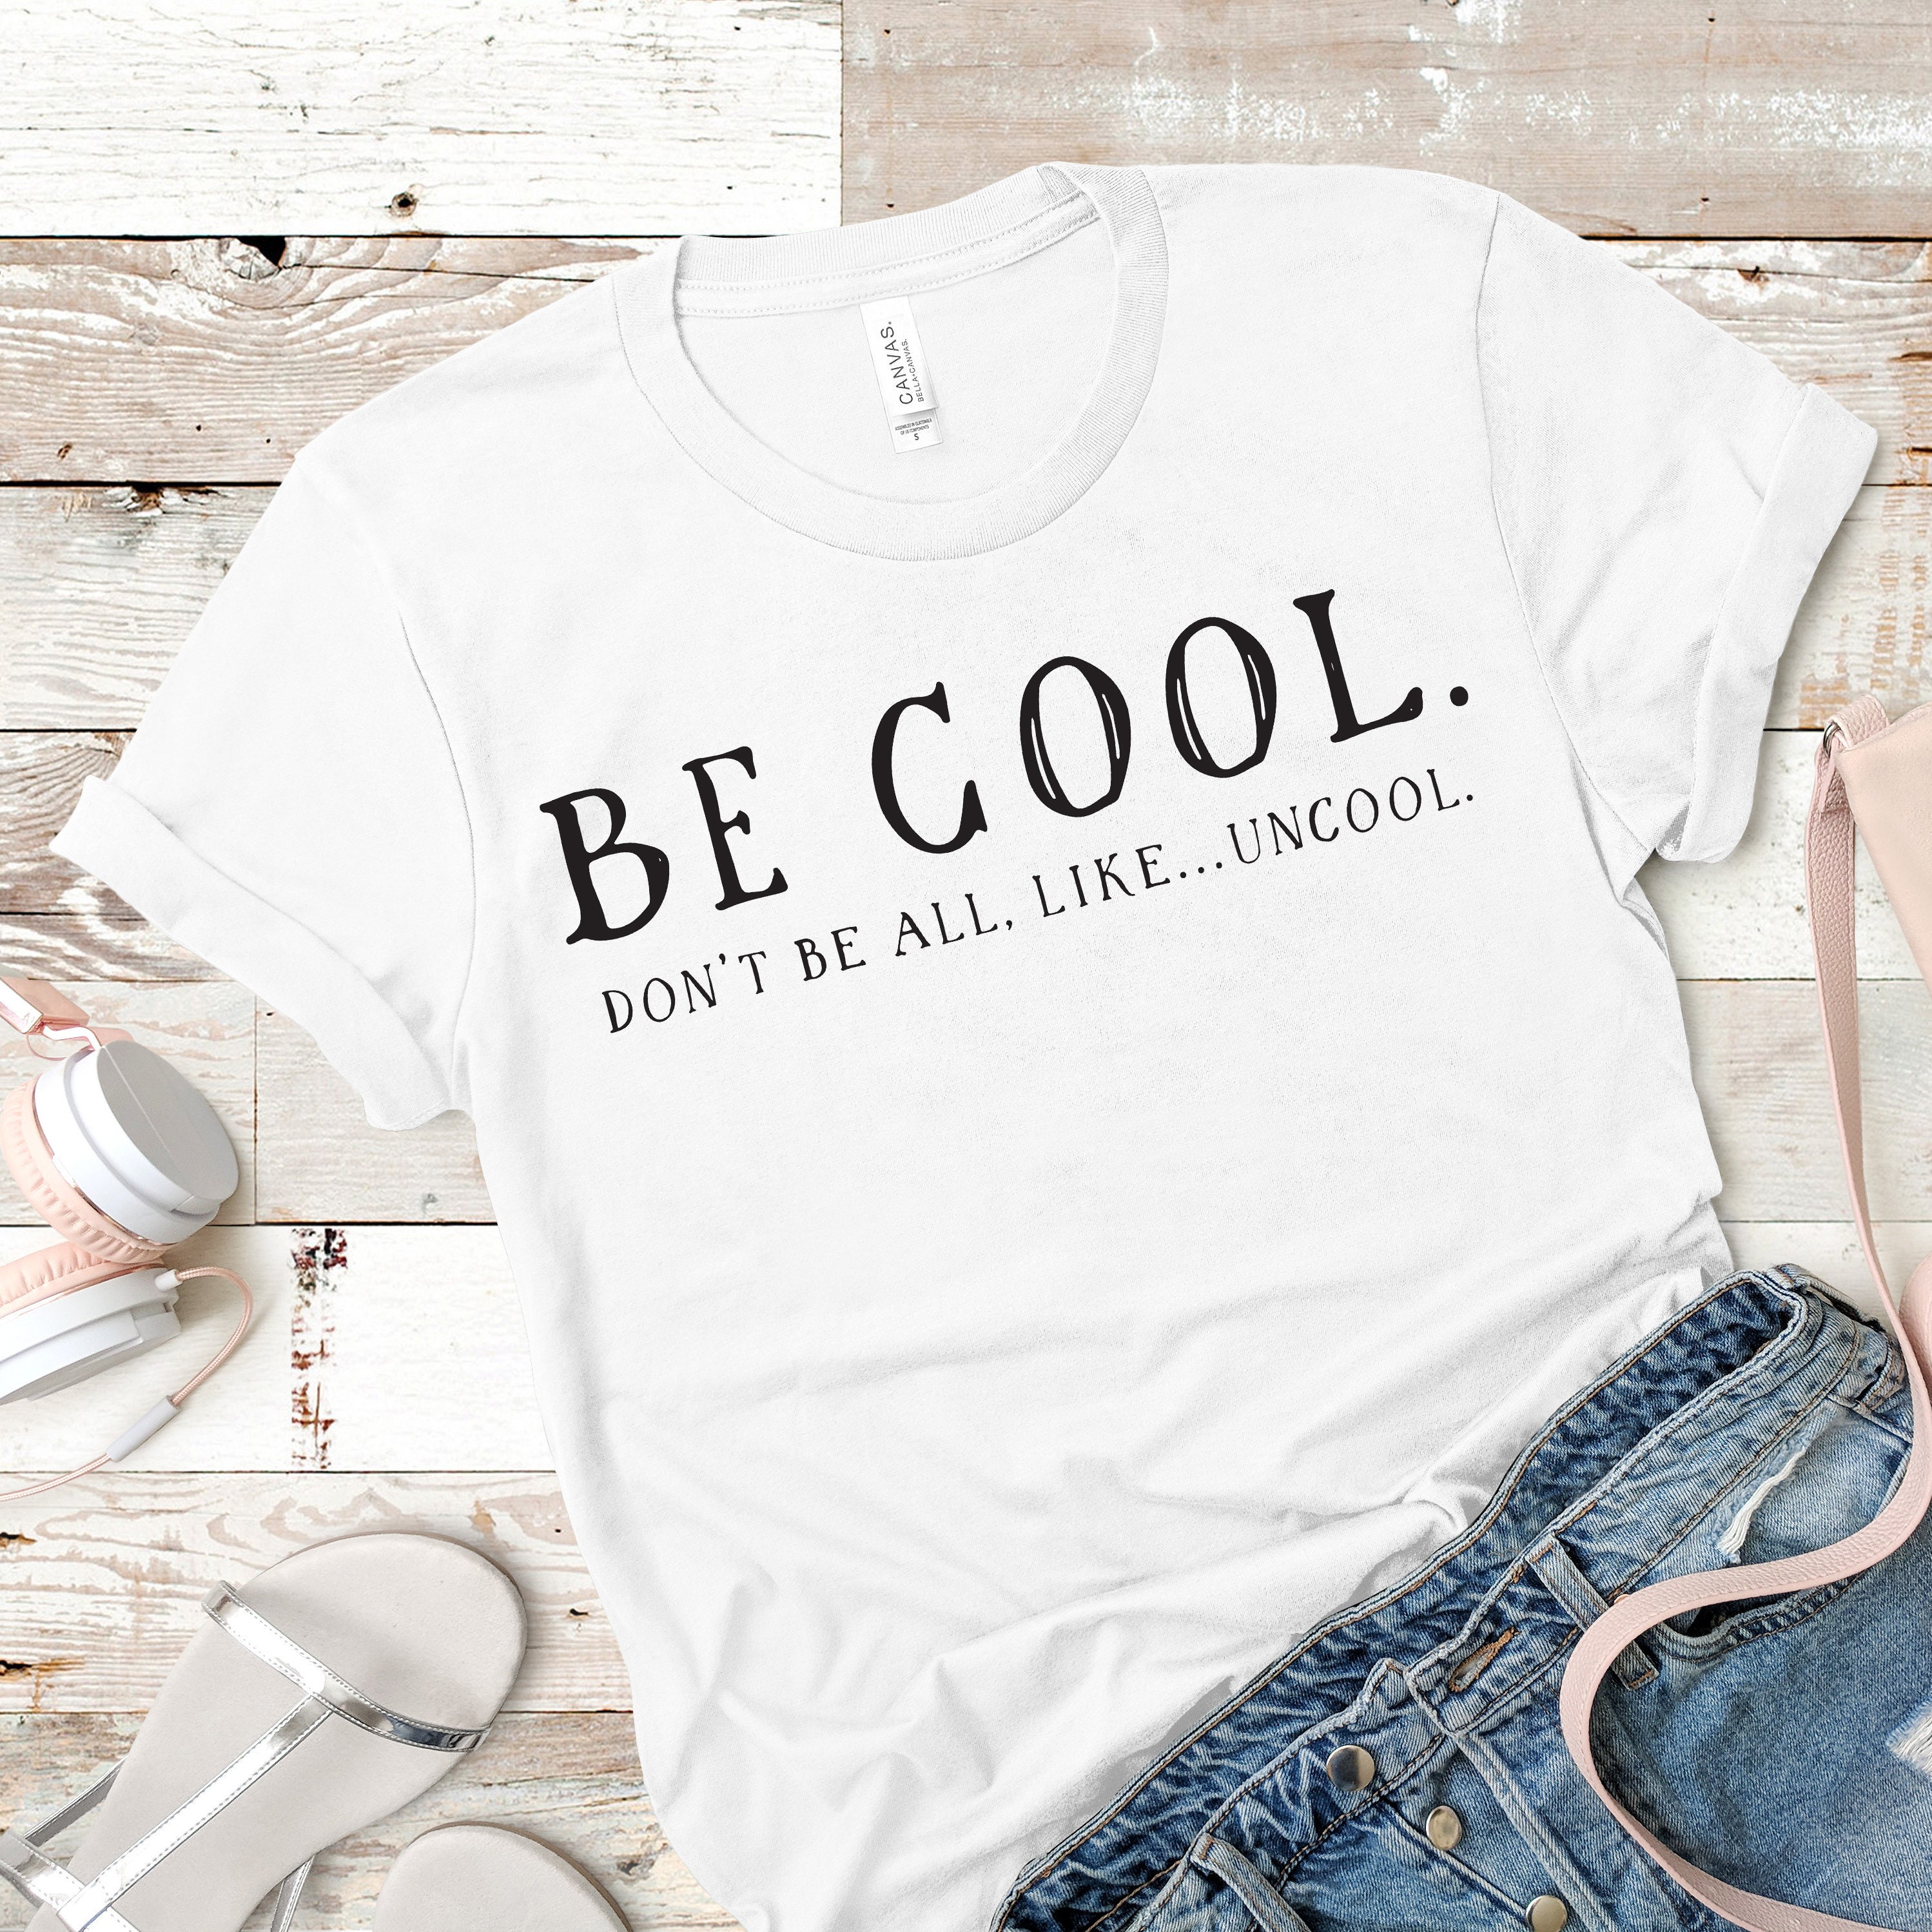 Be Cool. Don't Be All Like...uncool Countess Luann - Etsy